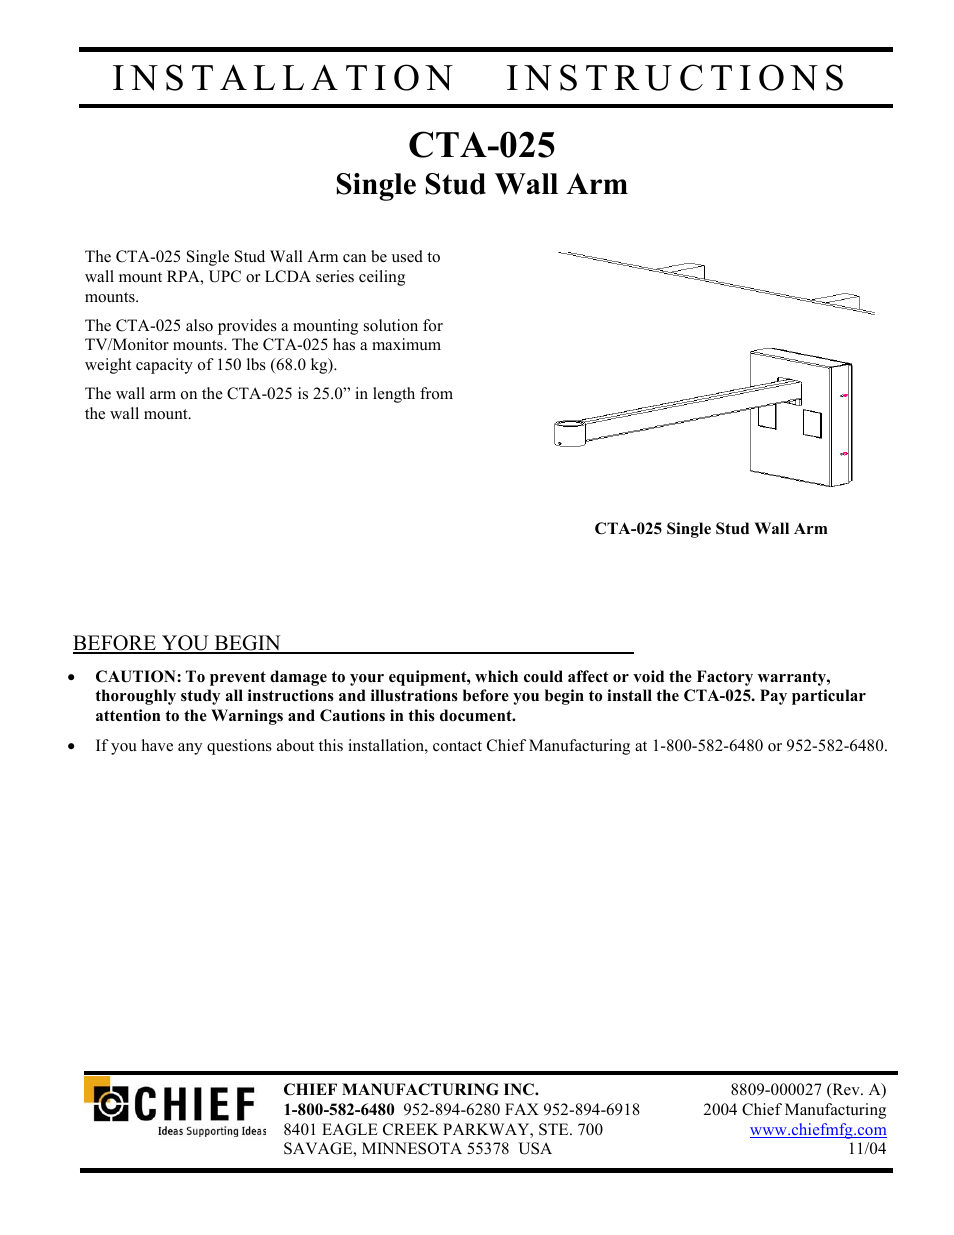 Chief Manufacturing Single Stud Wall Arm CTA-025 User Manual | 6 pages